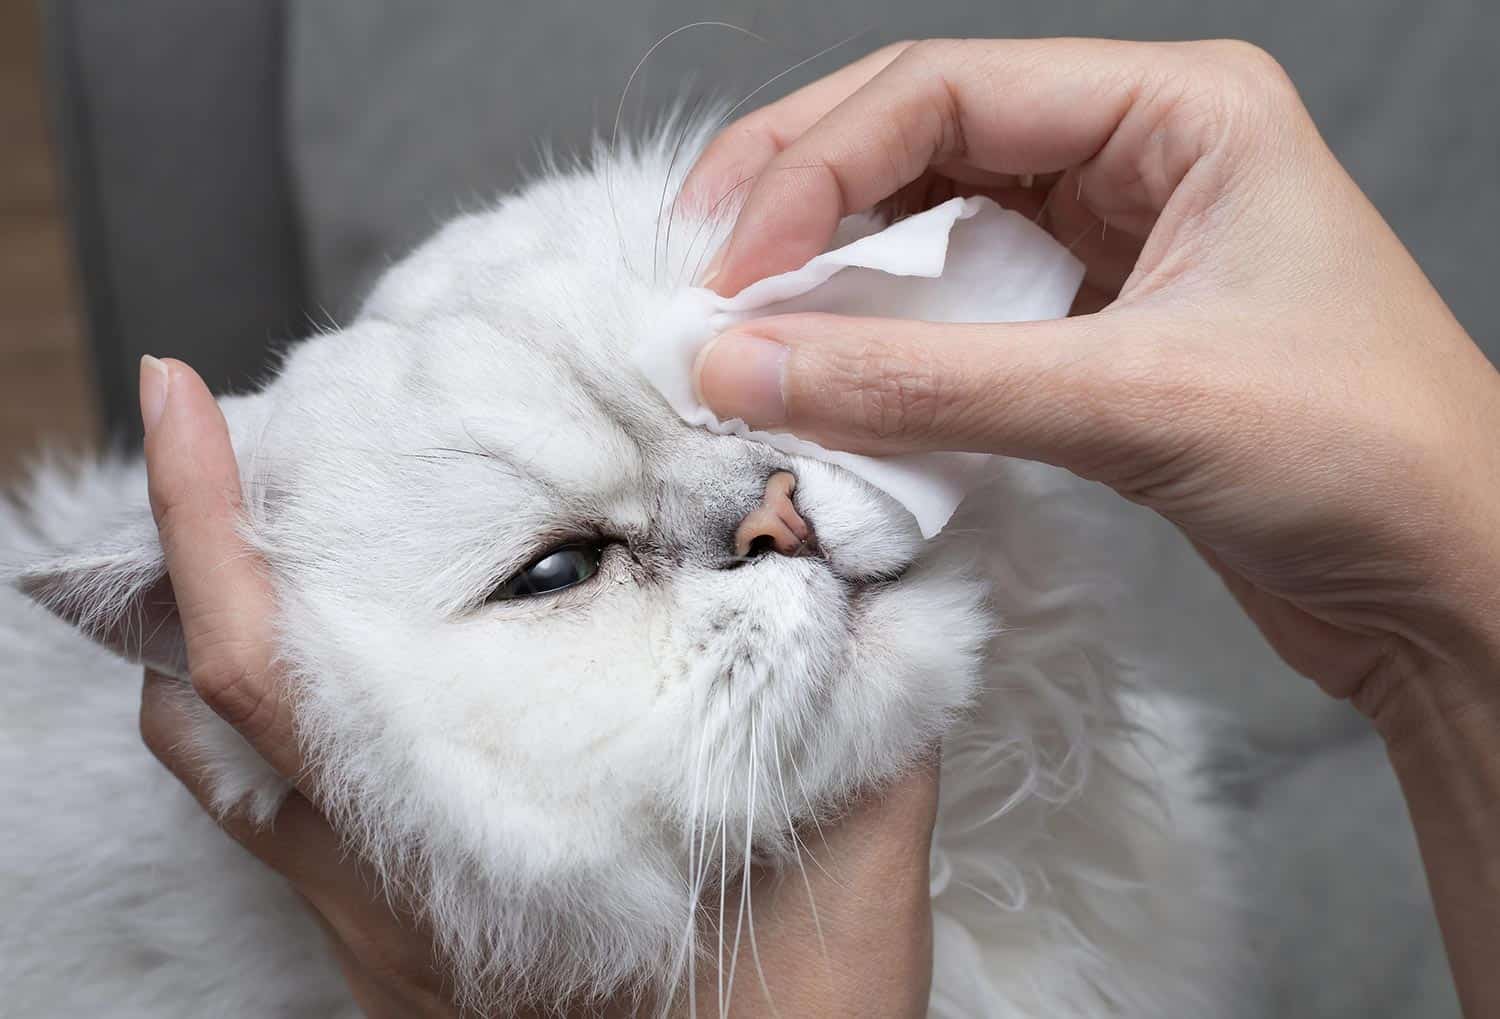 Cleaning persian chinchilla cat's eyes with cotton pad